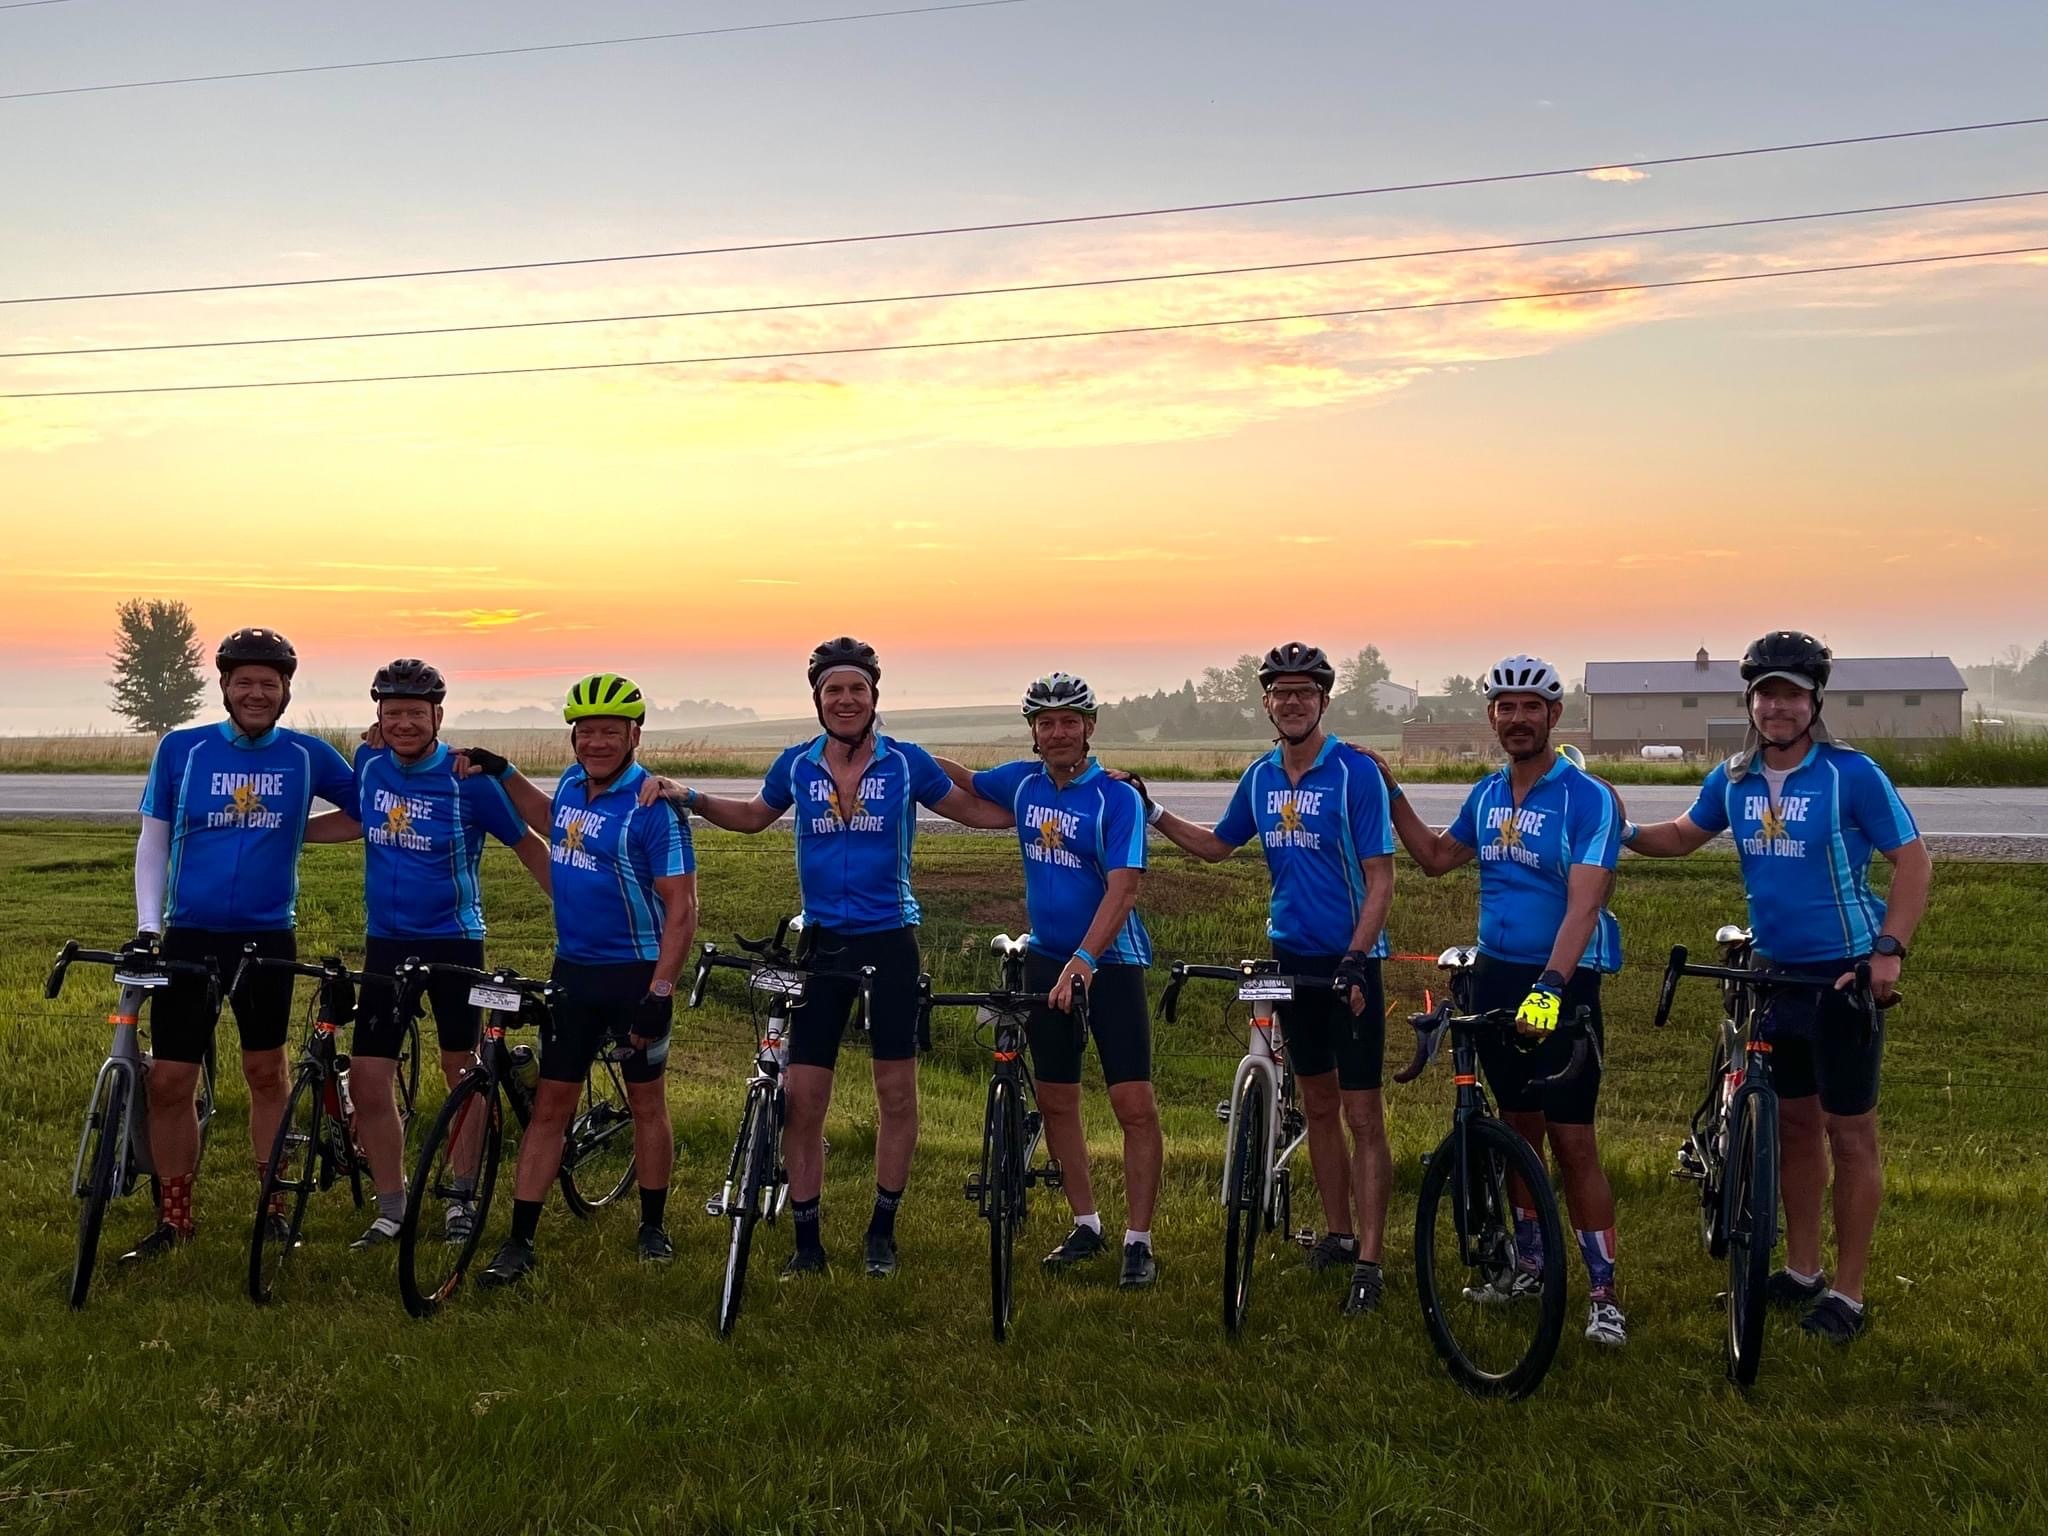 Cyclists posing at sunset